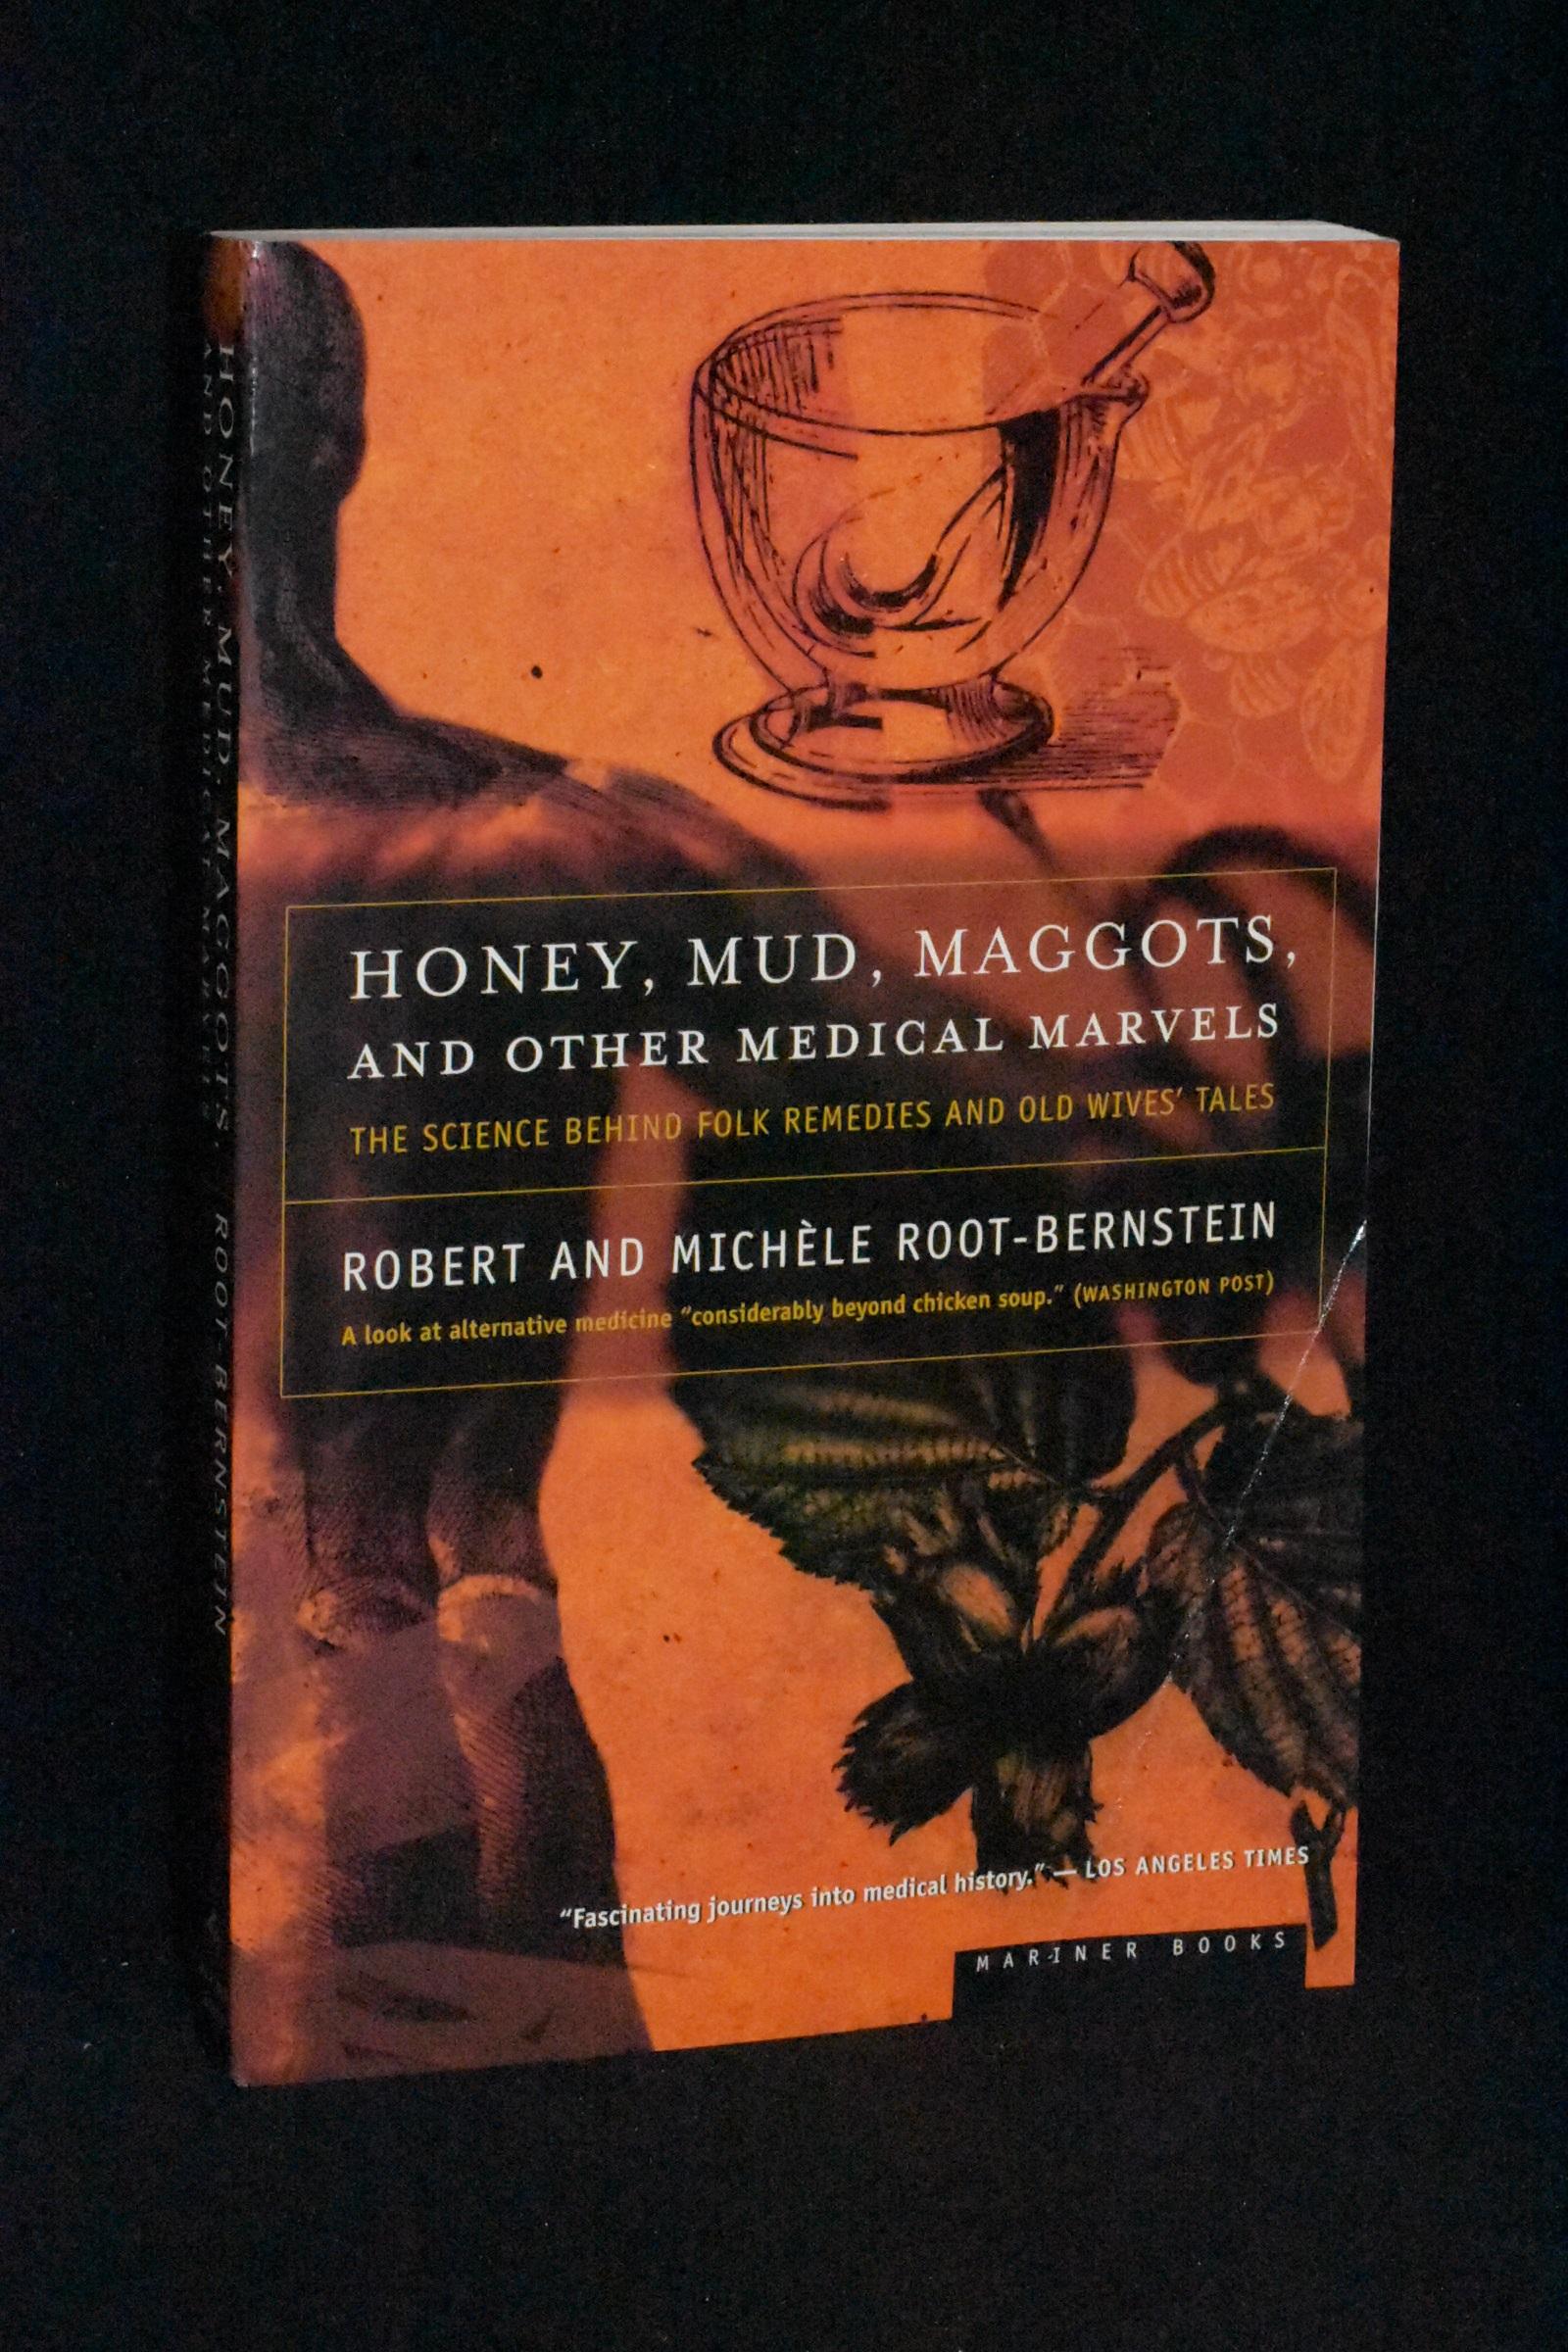 Honey, Mud, Maggots, and Other Medical Marvels: The Science Behind Folk Remedies and Old Wives Tales - Robert and Michele Root-Bernstein